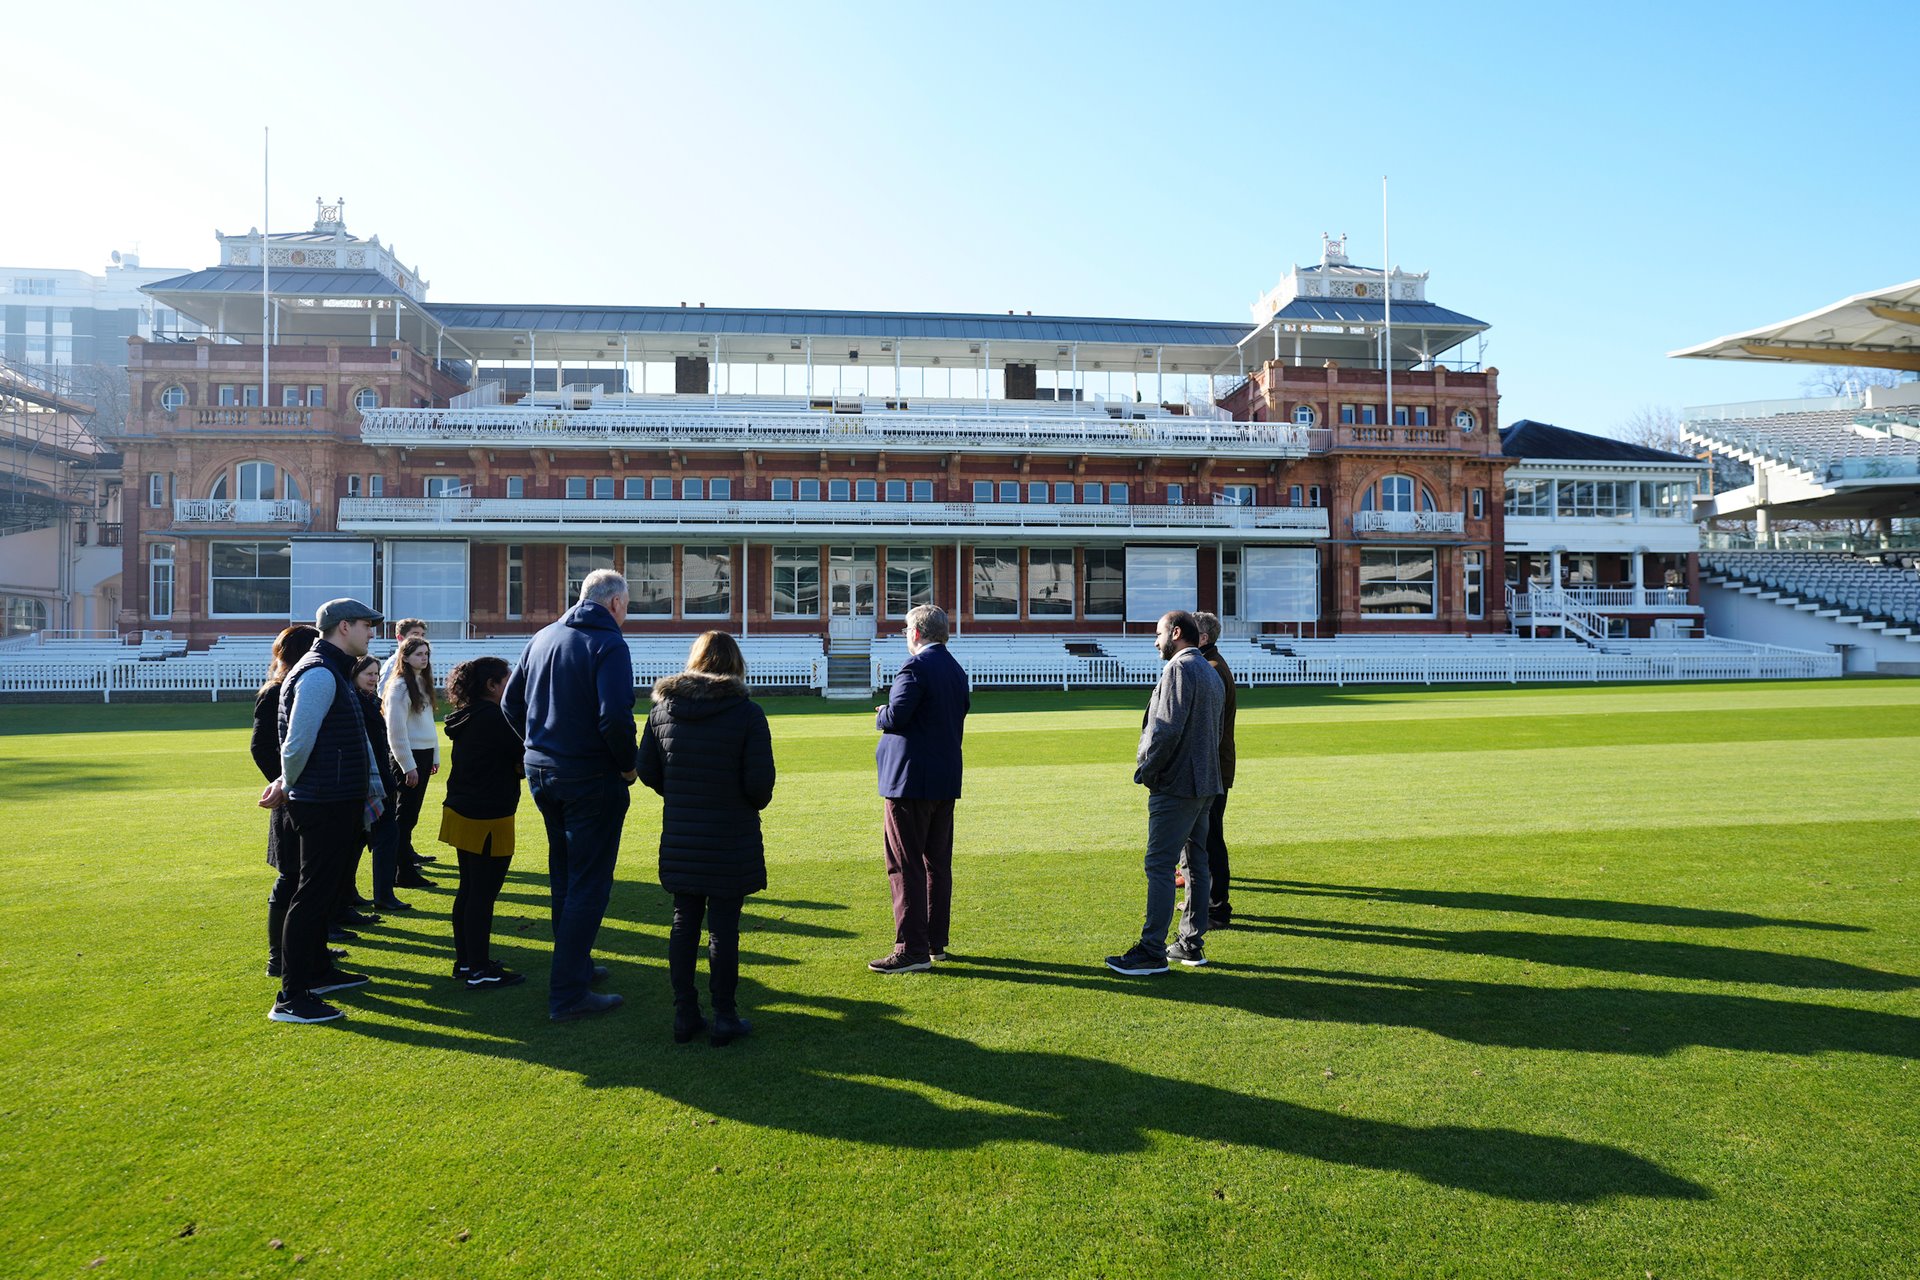 lord's cricket ground tour booking